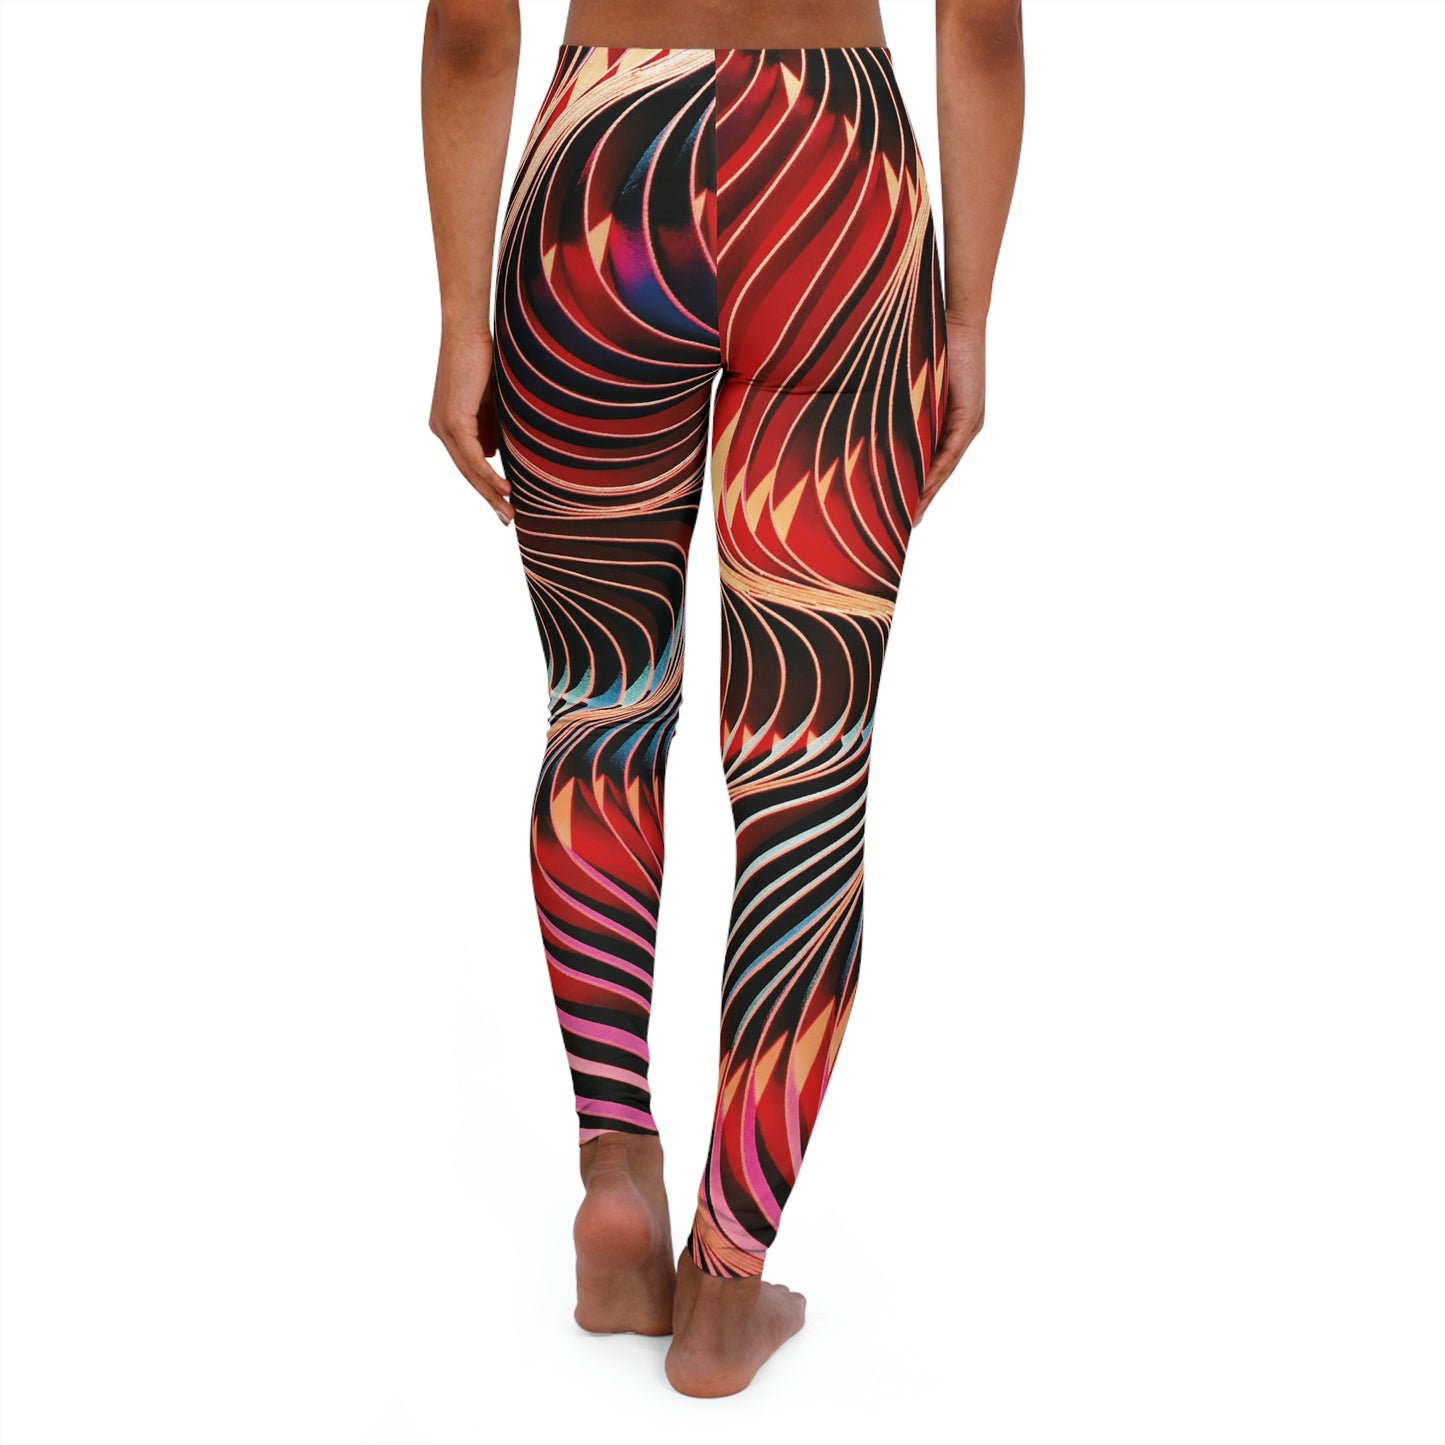 Abstract Women Leggings One of a Kind Workout Activewear for Wife Fitness, Best Friend, mom and me tights Christmas Gift